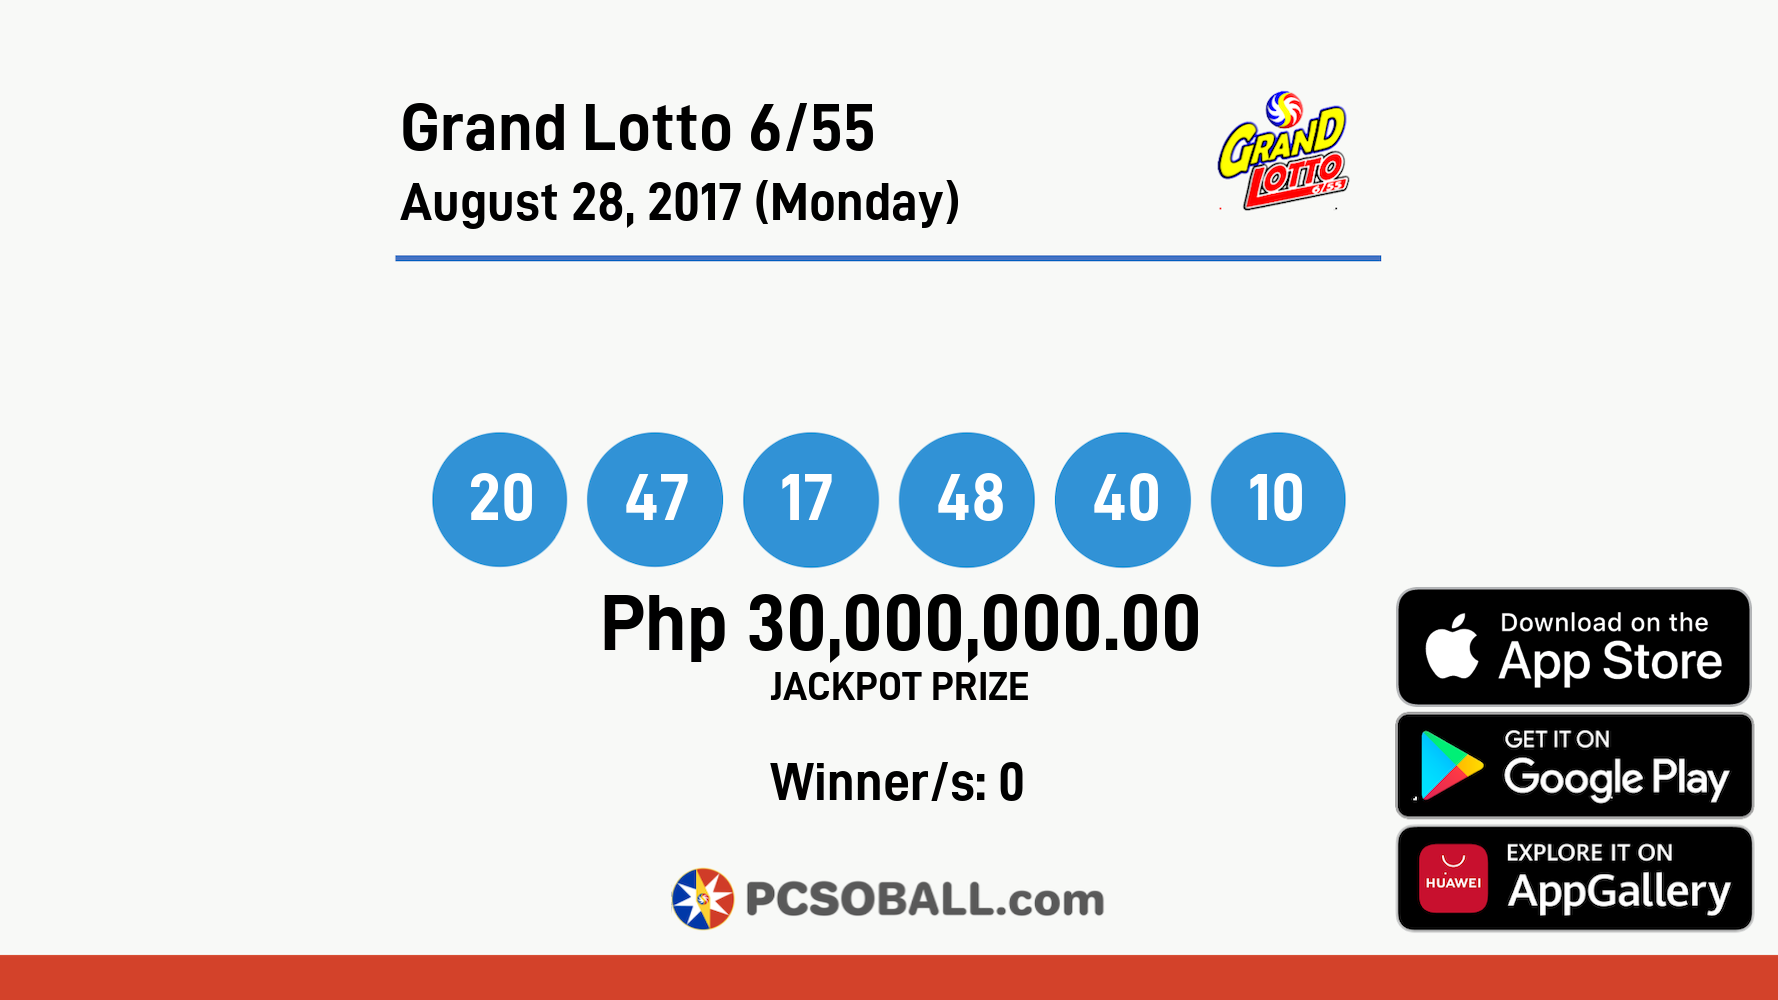 Grand Lotto 6/55 August 28, 2017 (Monday) Result